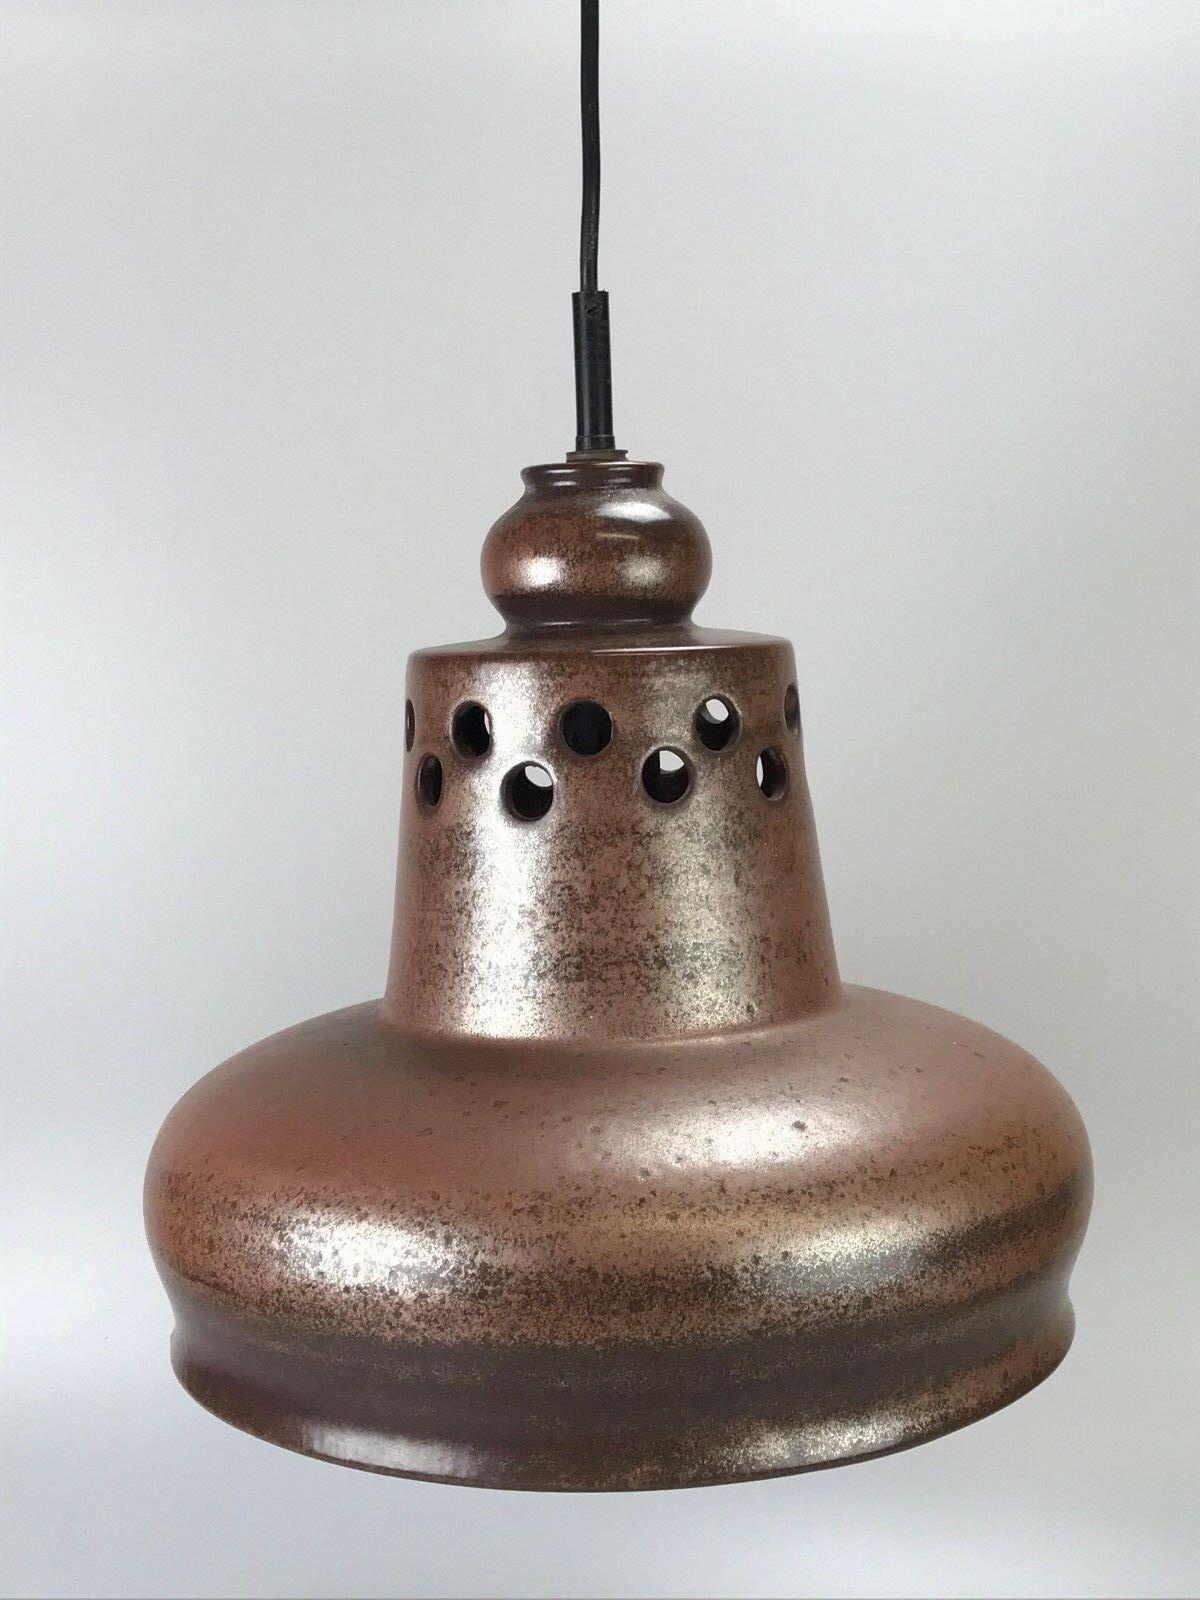 70s lamp light ceiling lamp ceramic mid century space age brown

Object: ceiling lamp

Manufacturer:

Condition: good

Age: around 1960-1970

Dimensions:

Diameter = 33cm
Hanging height = 116cm

Other notes:

The pictures serve as